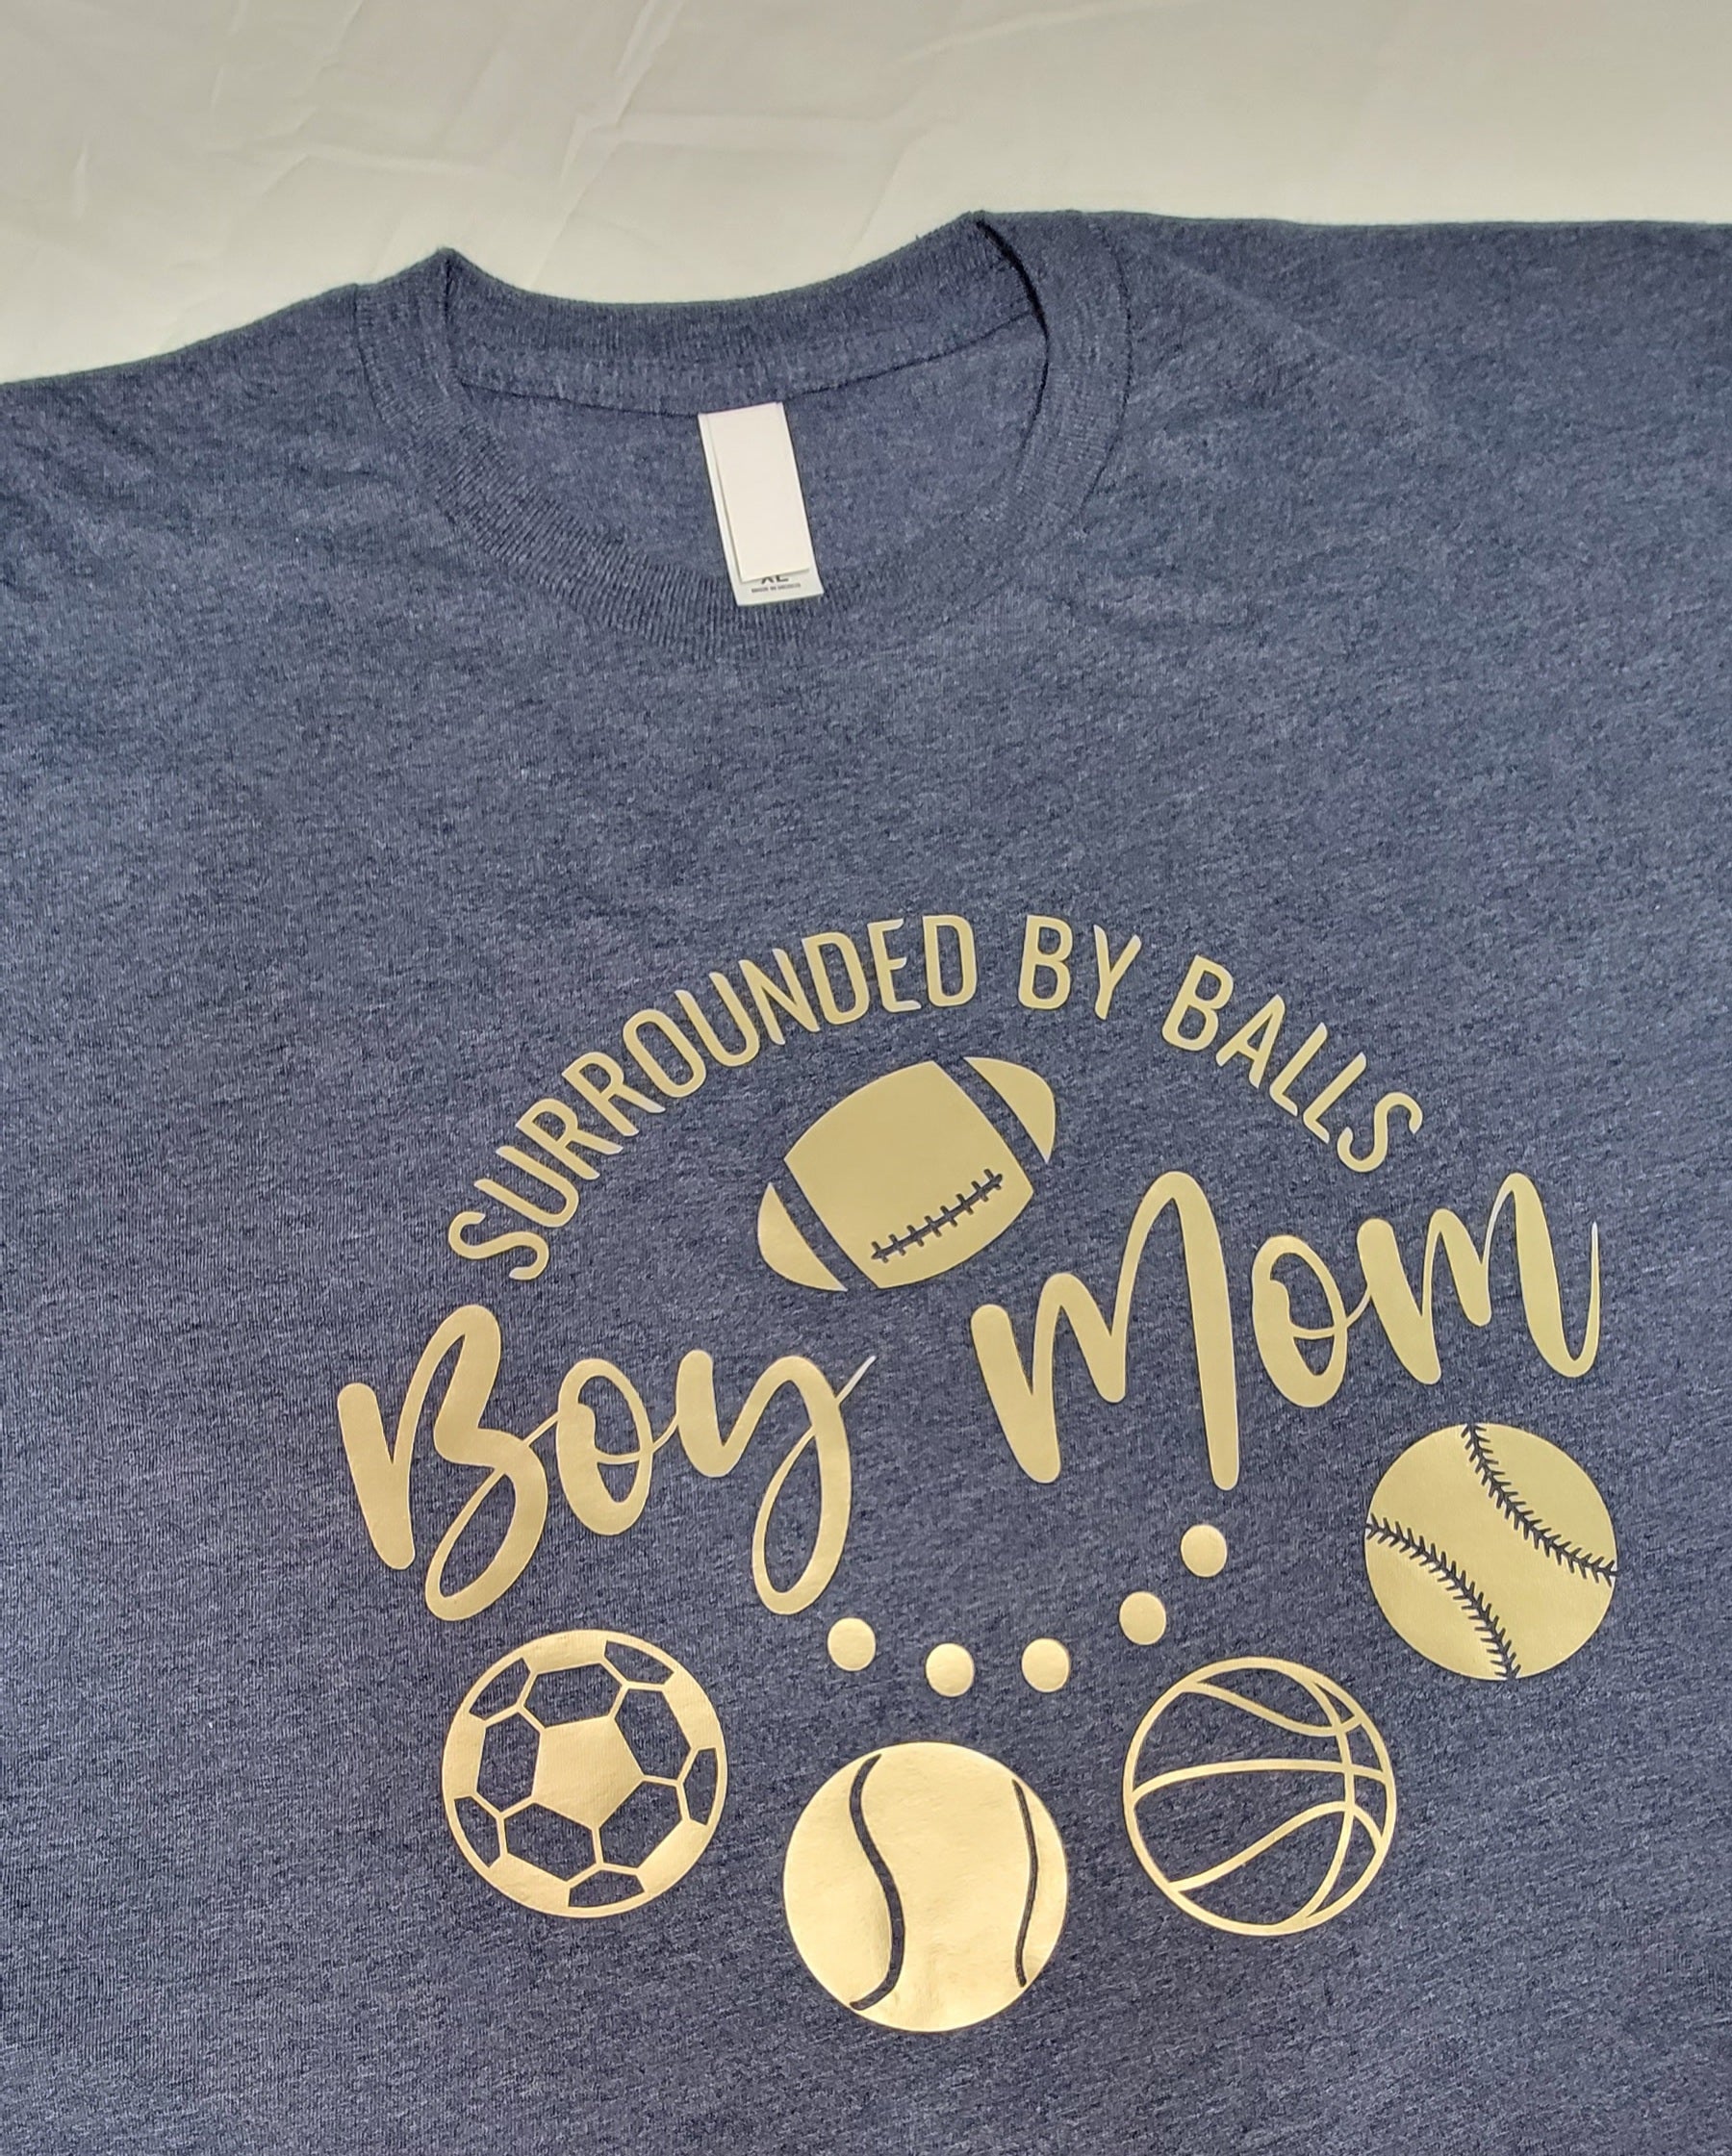 Surrounded By Balls Tee